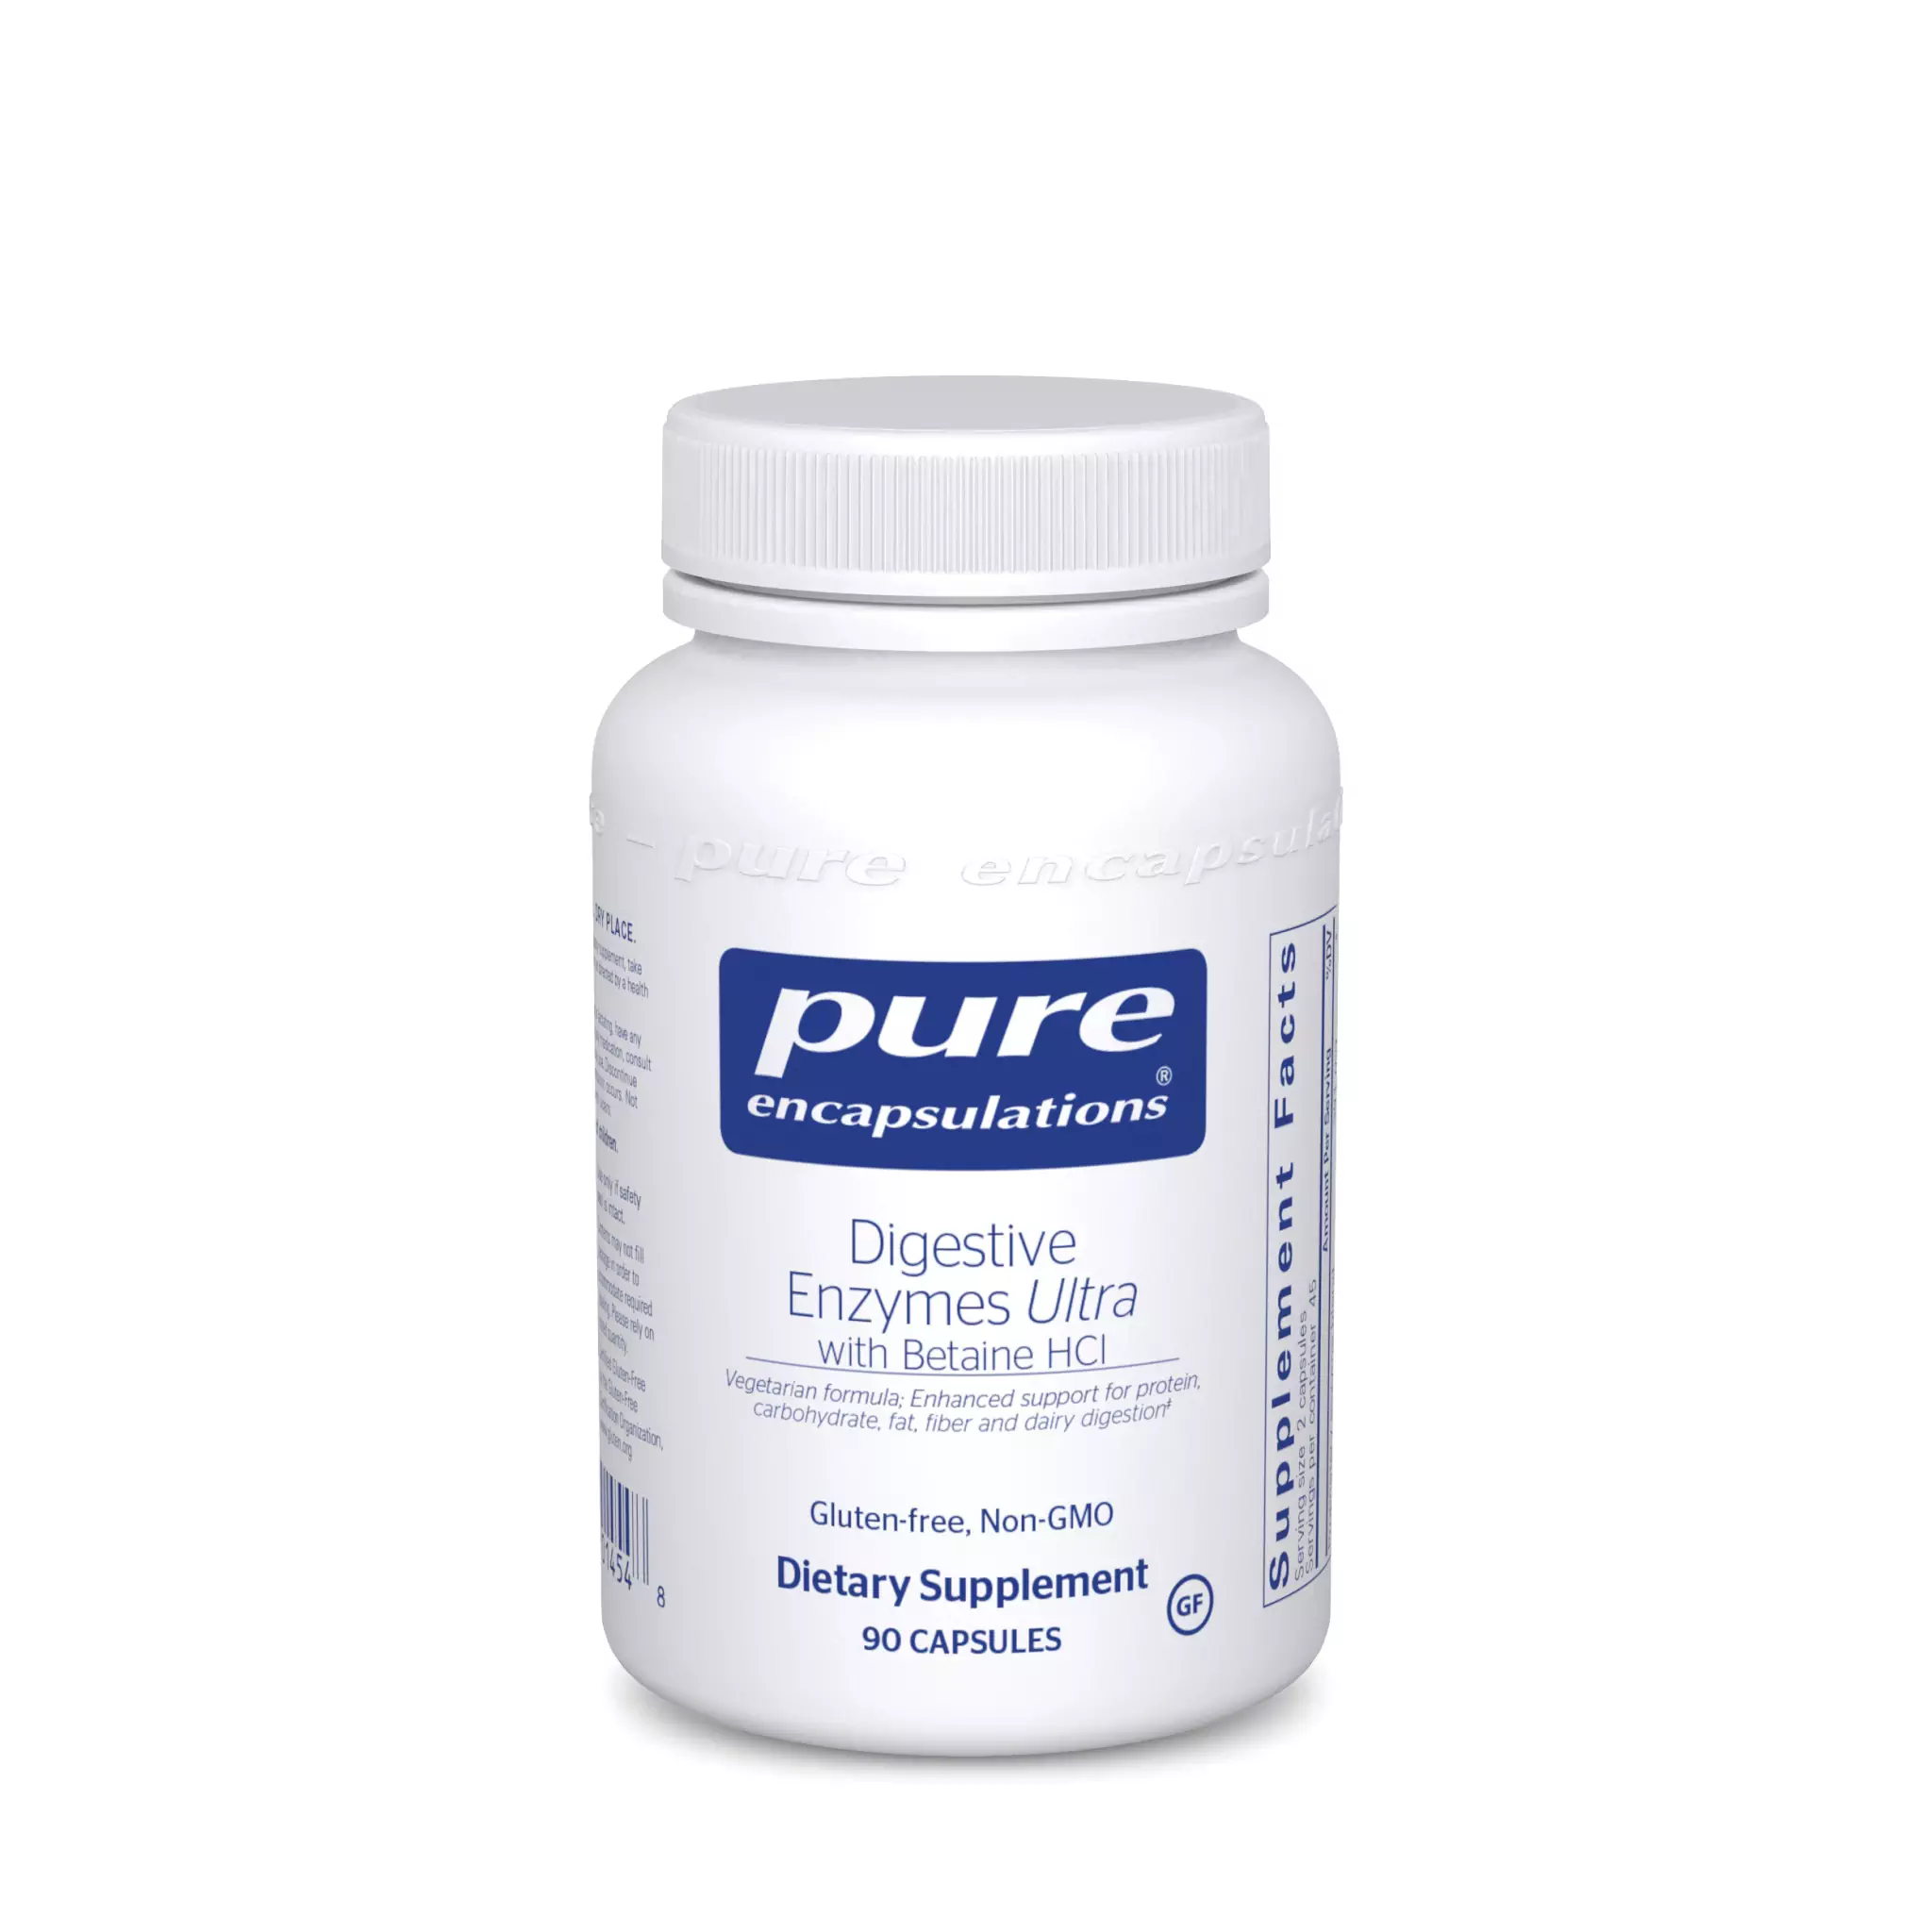 Pure Encapsulations - Digestive Enzymes Ult Bet Hcl